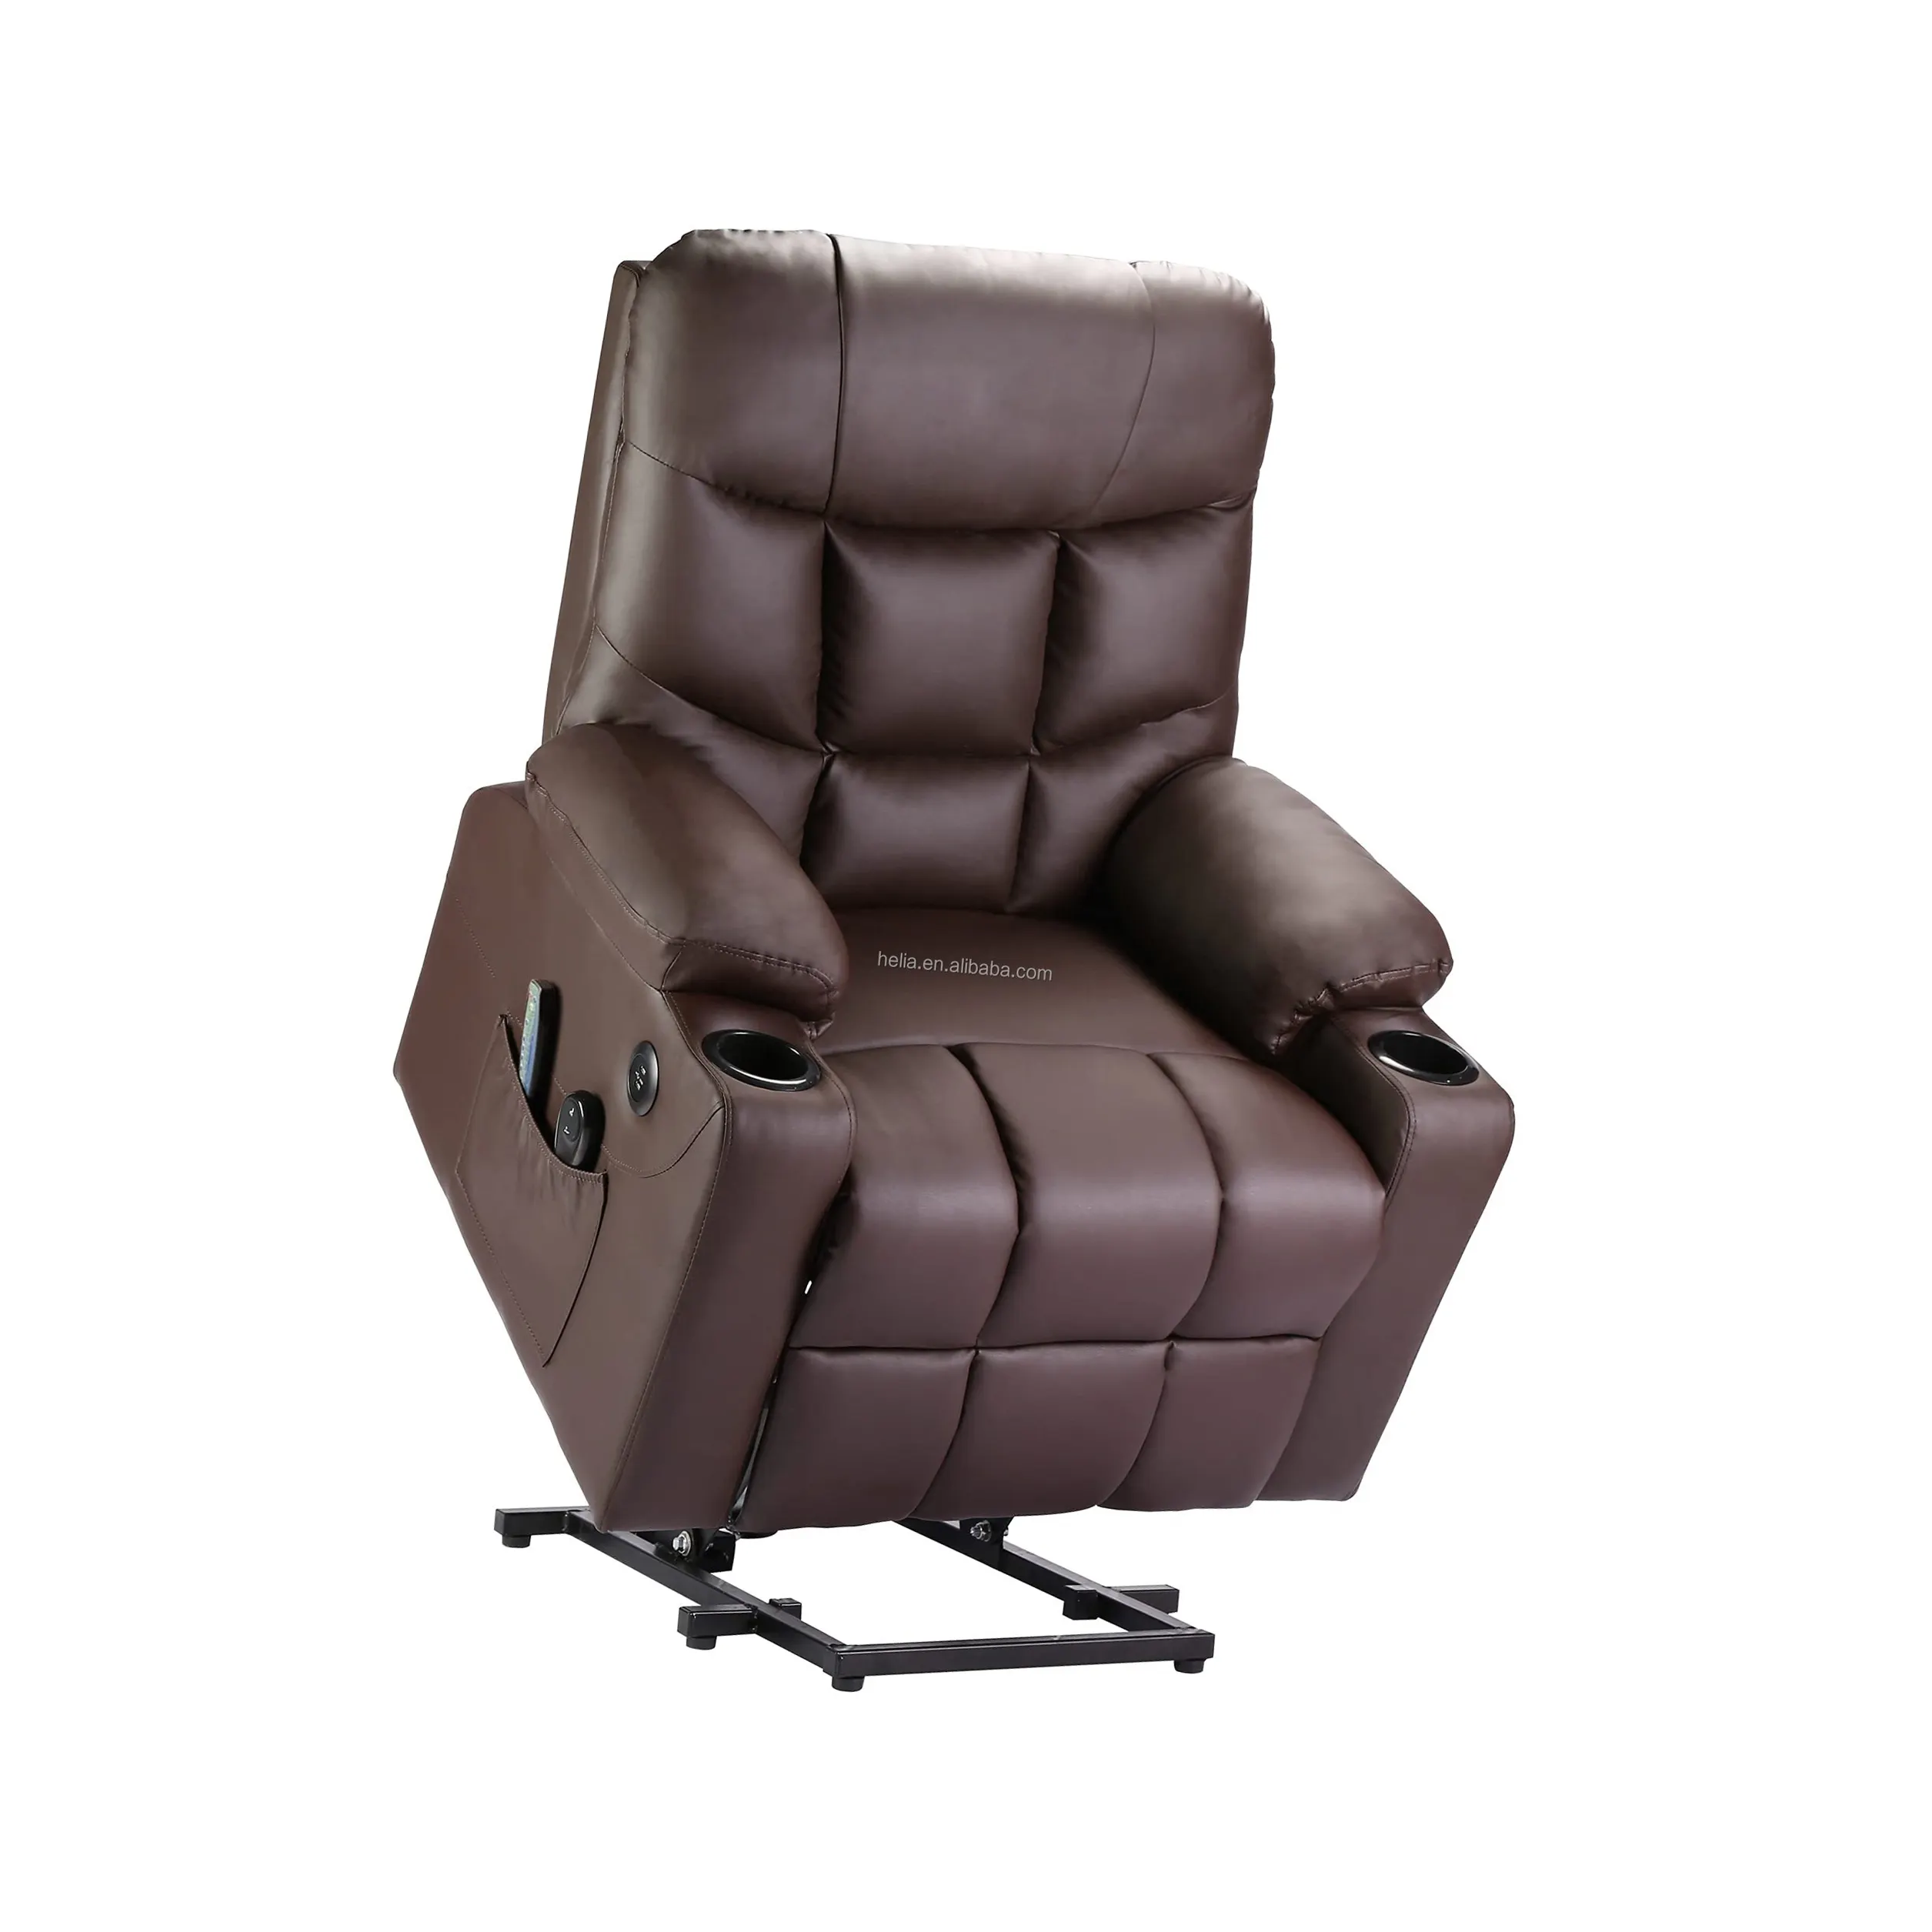 Luxury Couch Electric Lazy Boy Recliner Massage Chairs Reclining Chair For Home Cinema